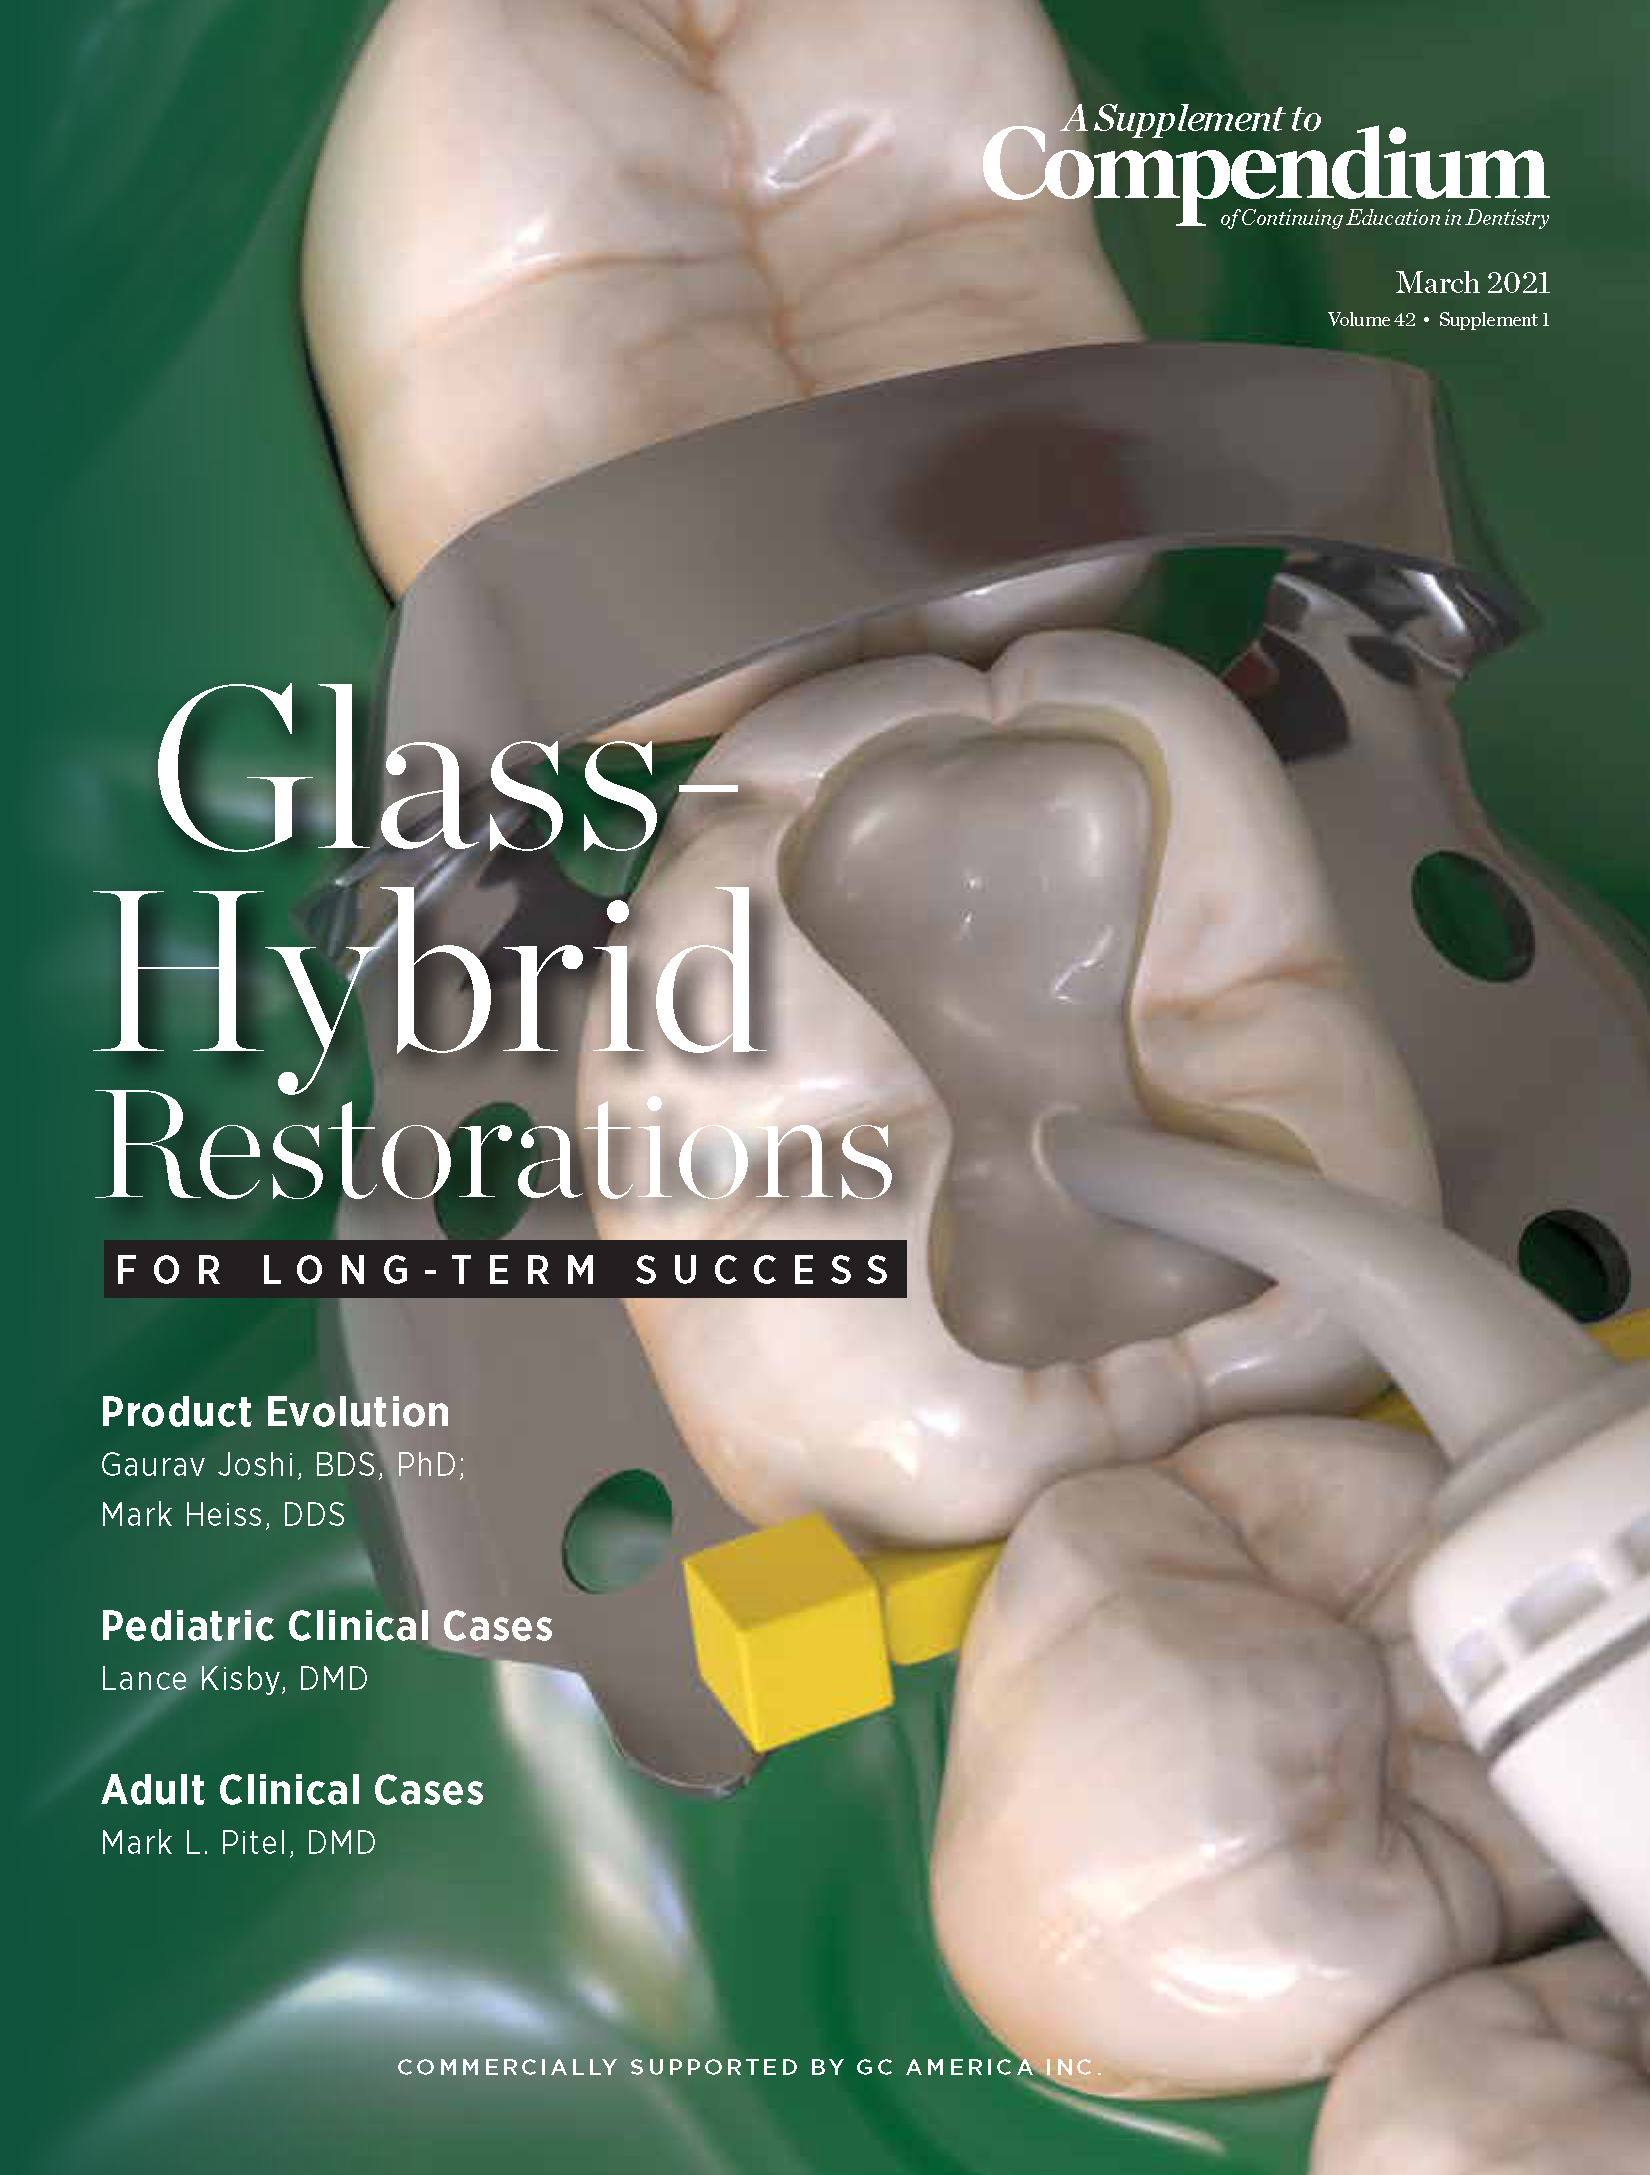 Glass-Hybrid Restorations for Long-term Success March 2021 Cover